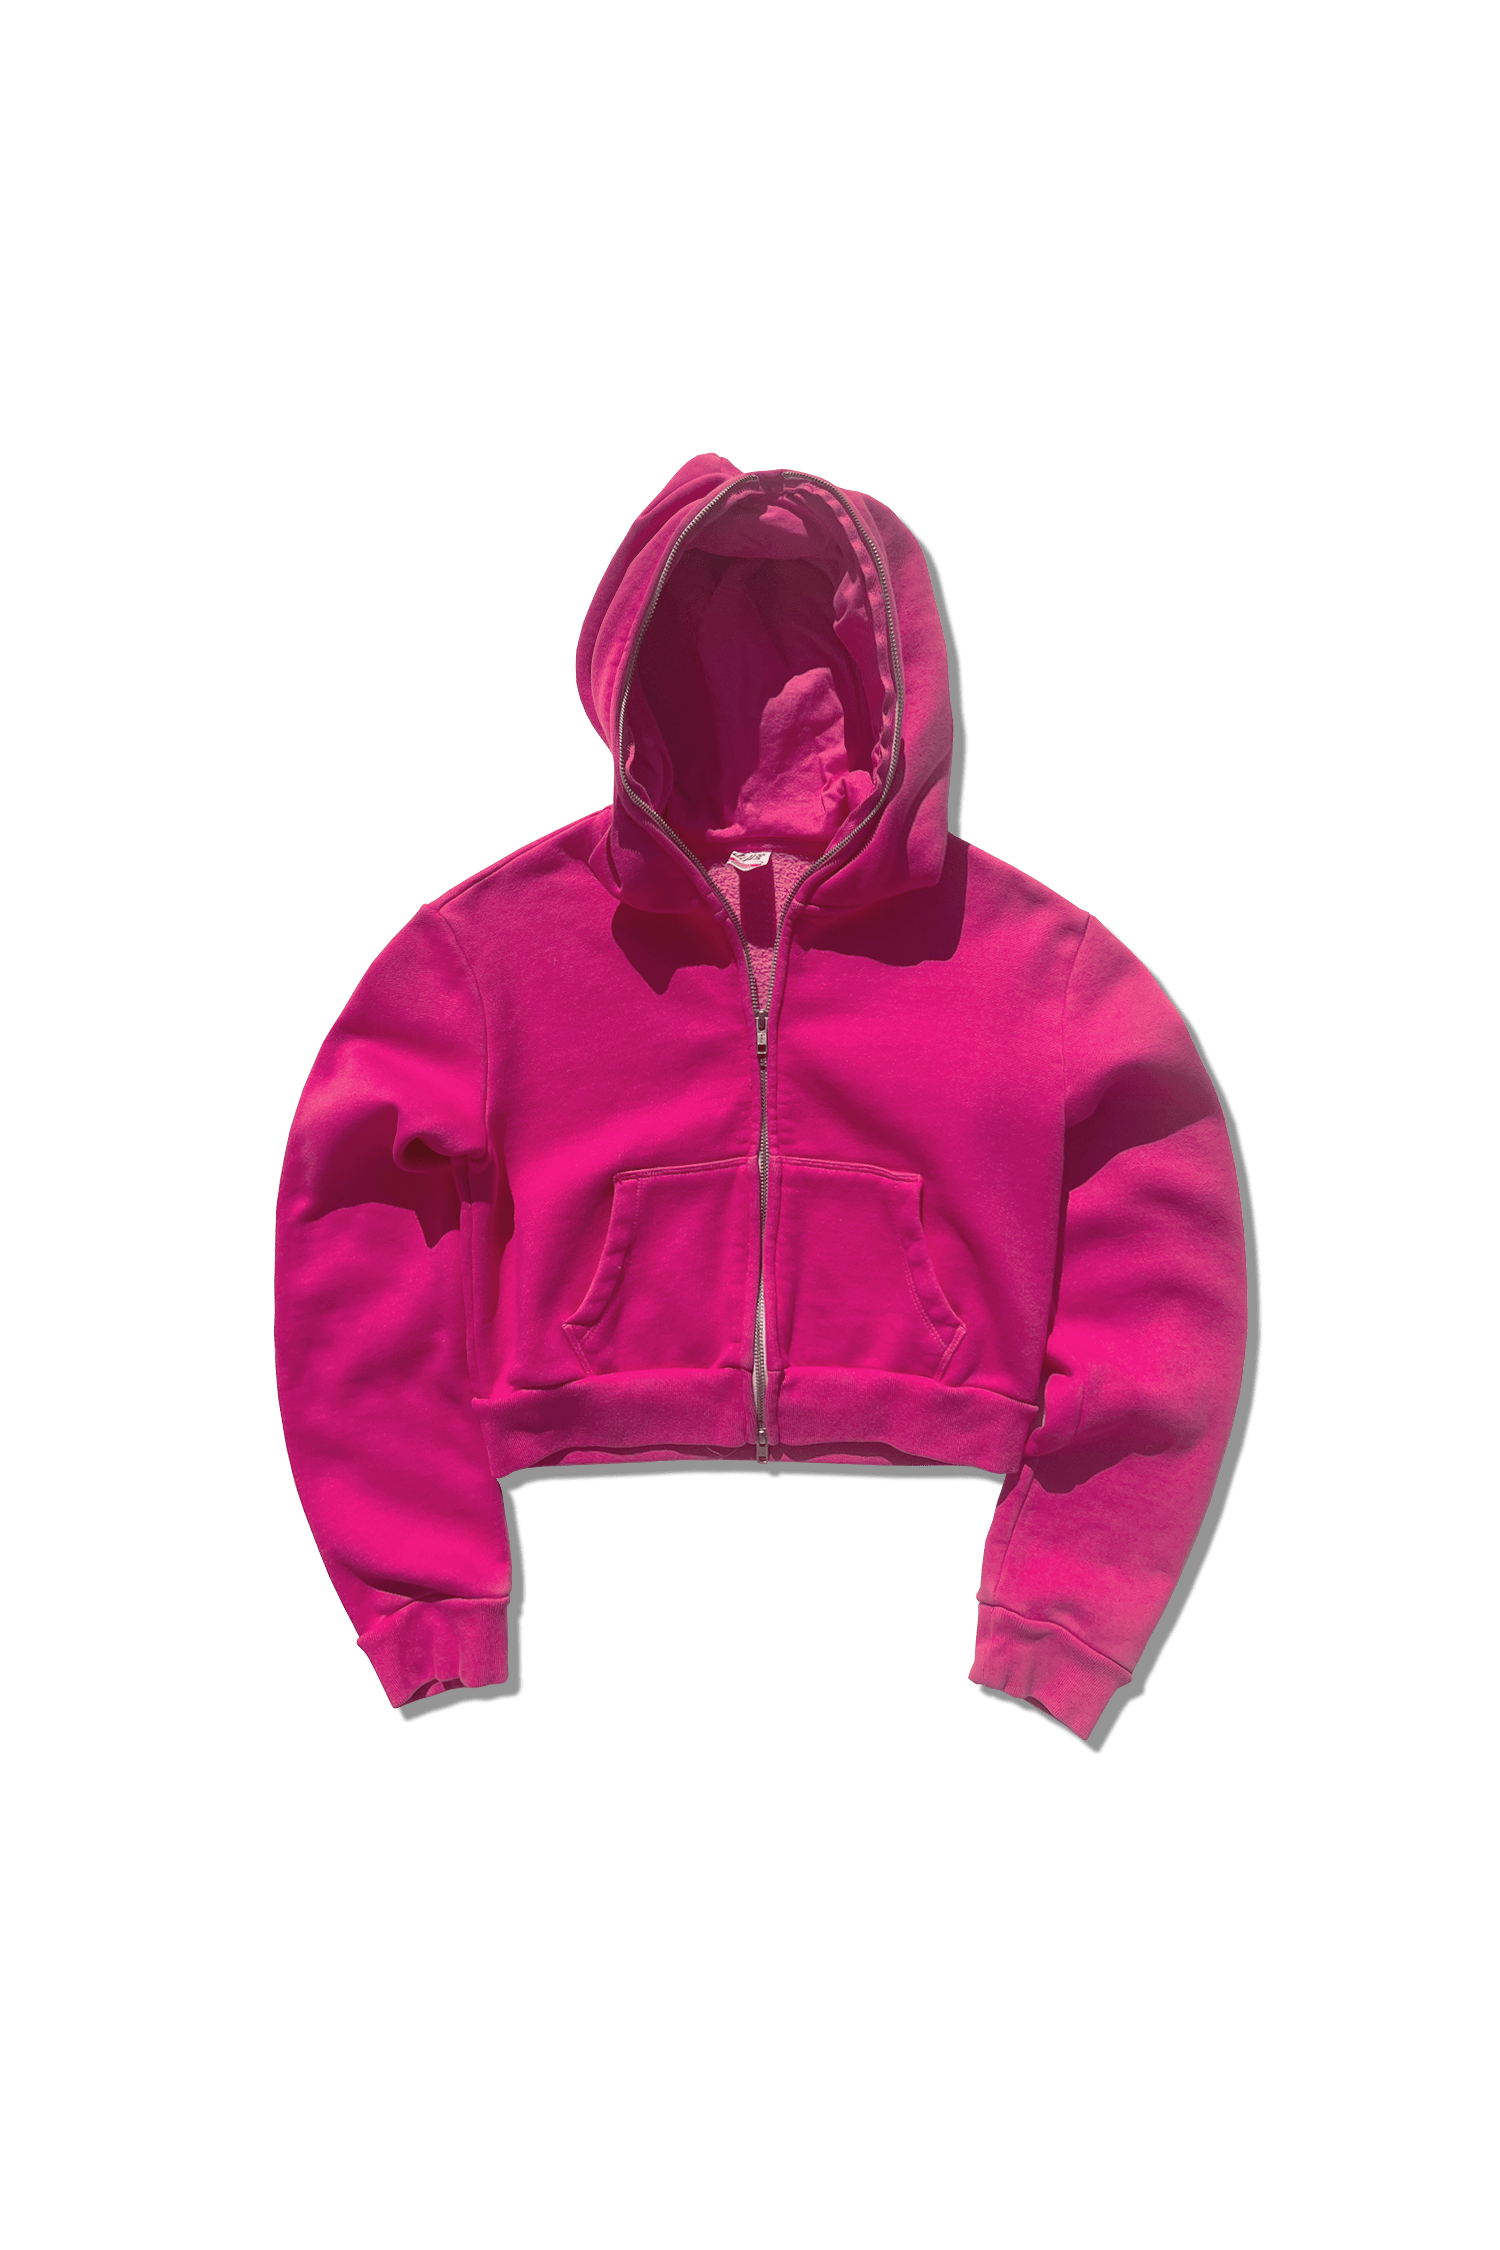 Exclusive Cropped Full Zip Body Bag Hoodie - Fuchsia Rose – MADE